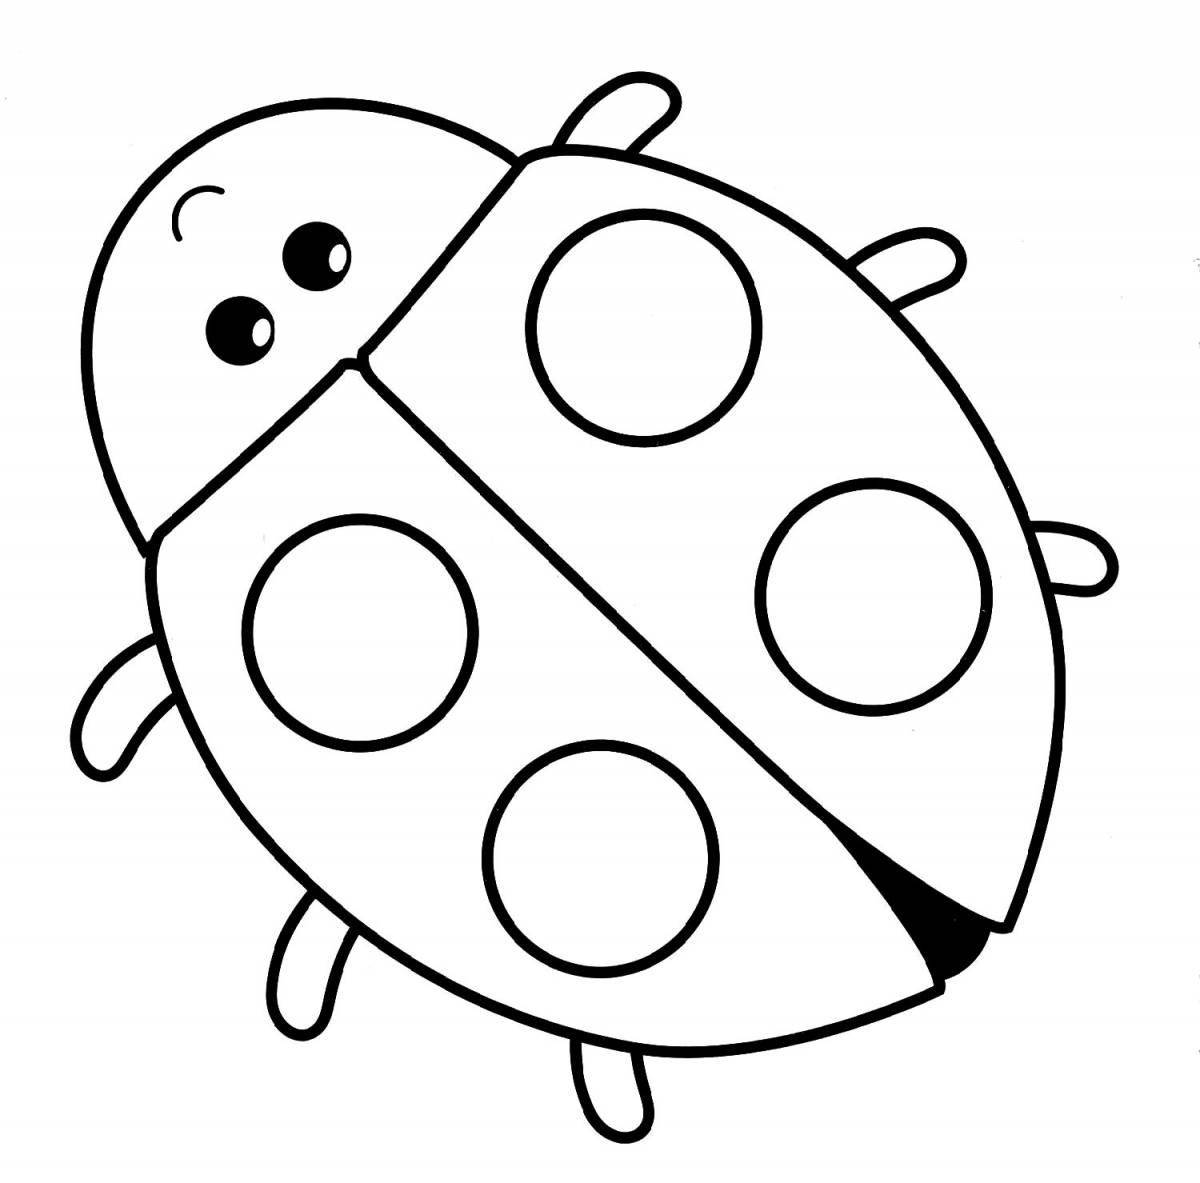 Inviting ladybug coloring pages for kids